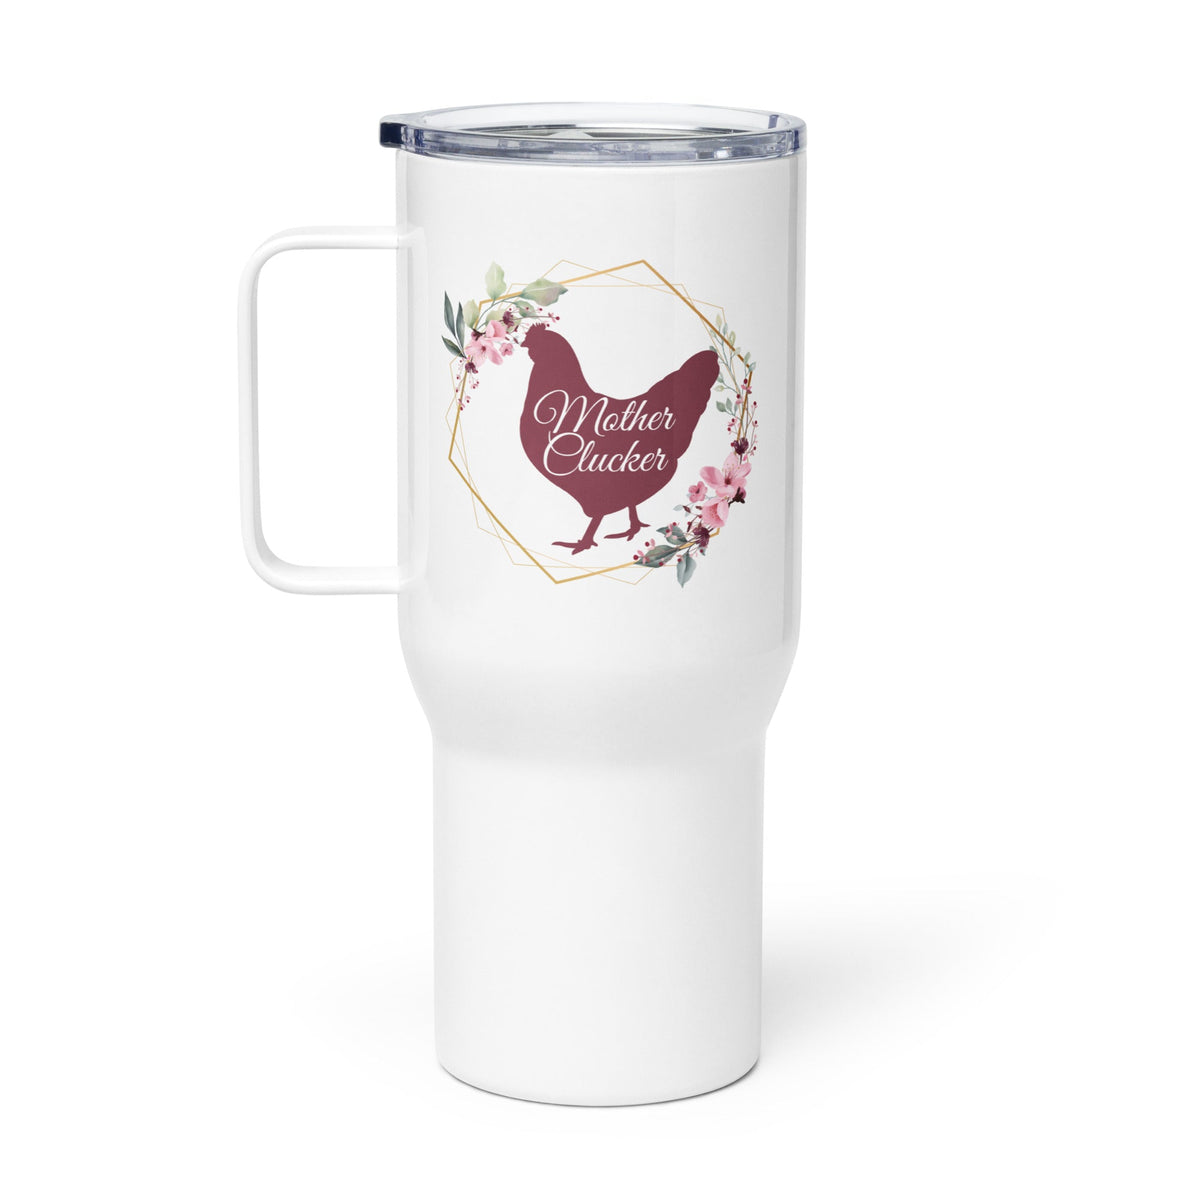 Mother Clucker Travel Mug w/ Handle - Cluck It All Farms